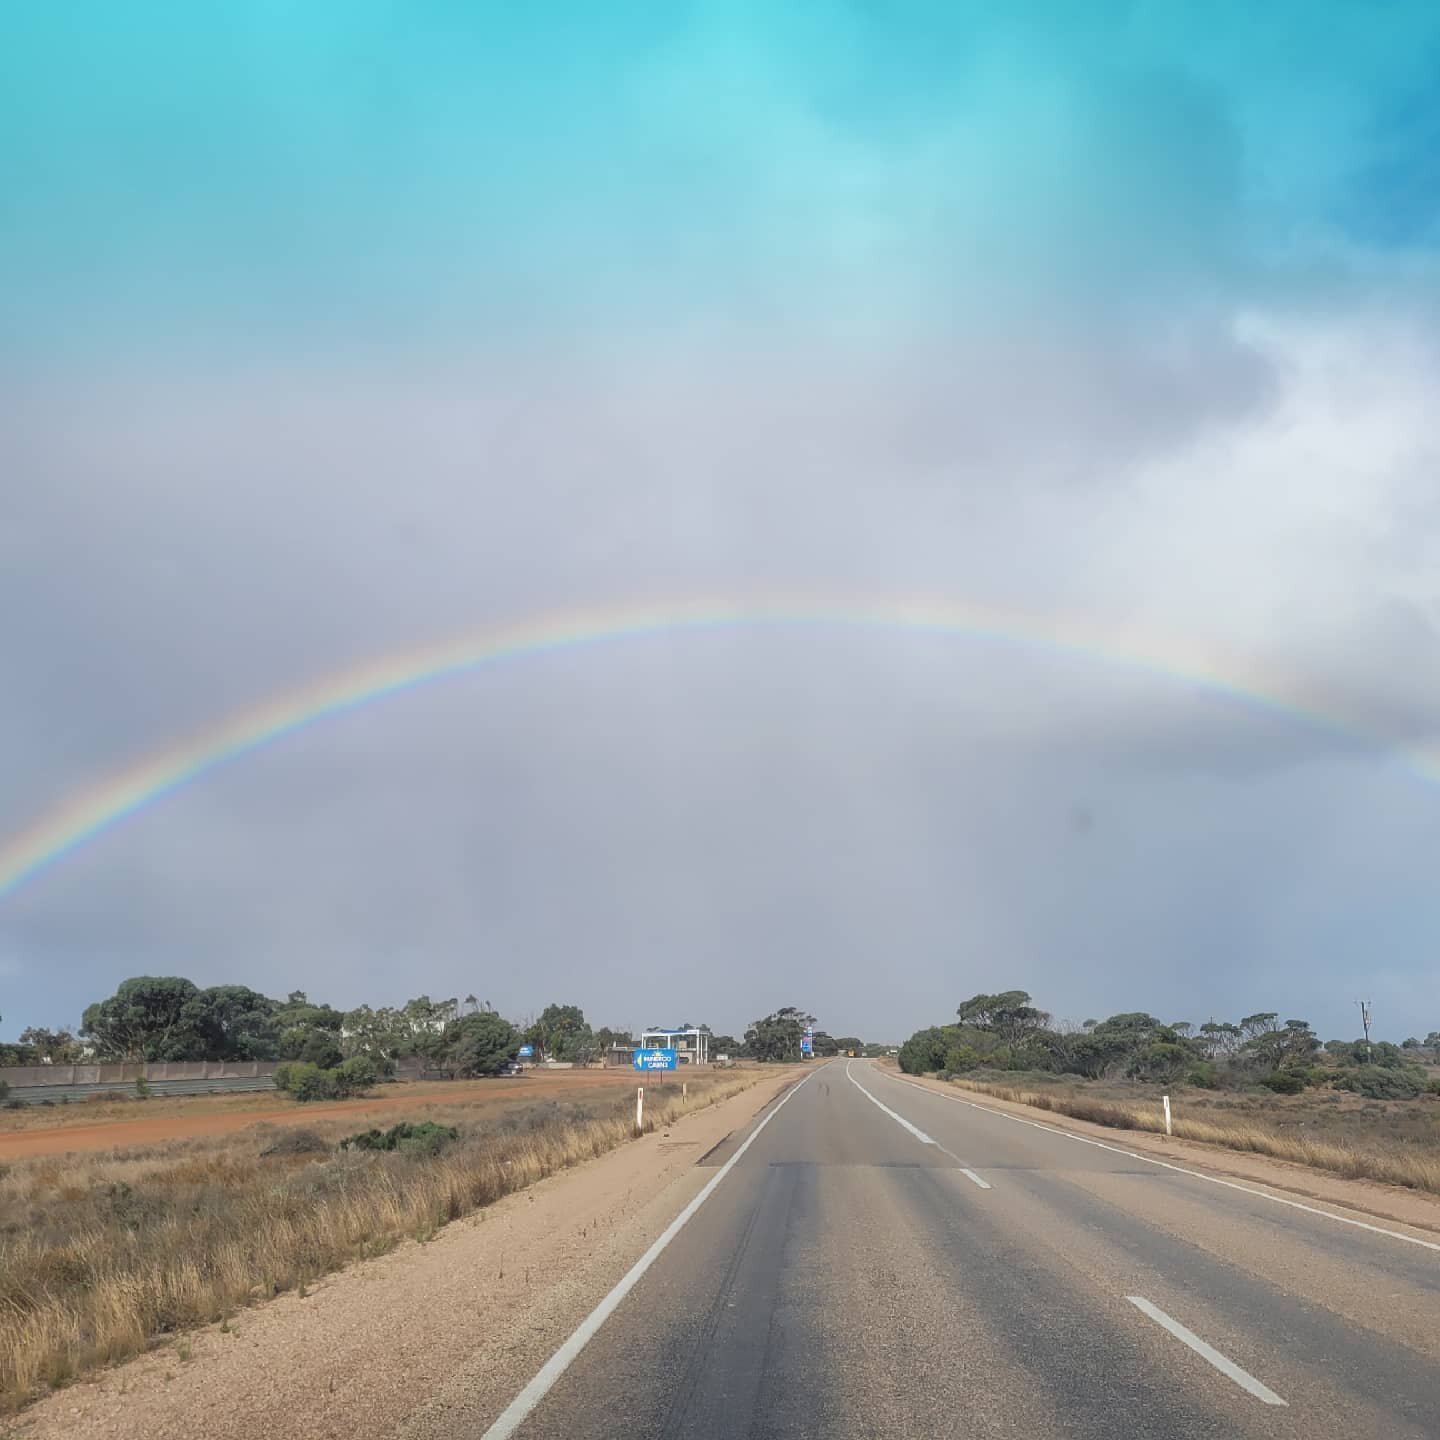 Day XXIV cross-country road trip. Rainbow over the Nullarbor. Great country, gotta say.